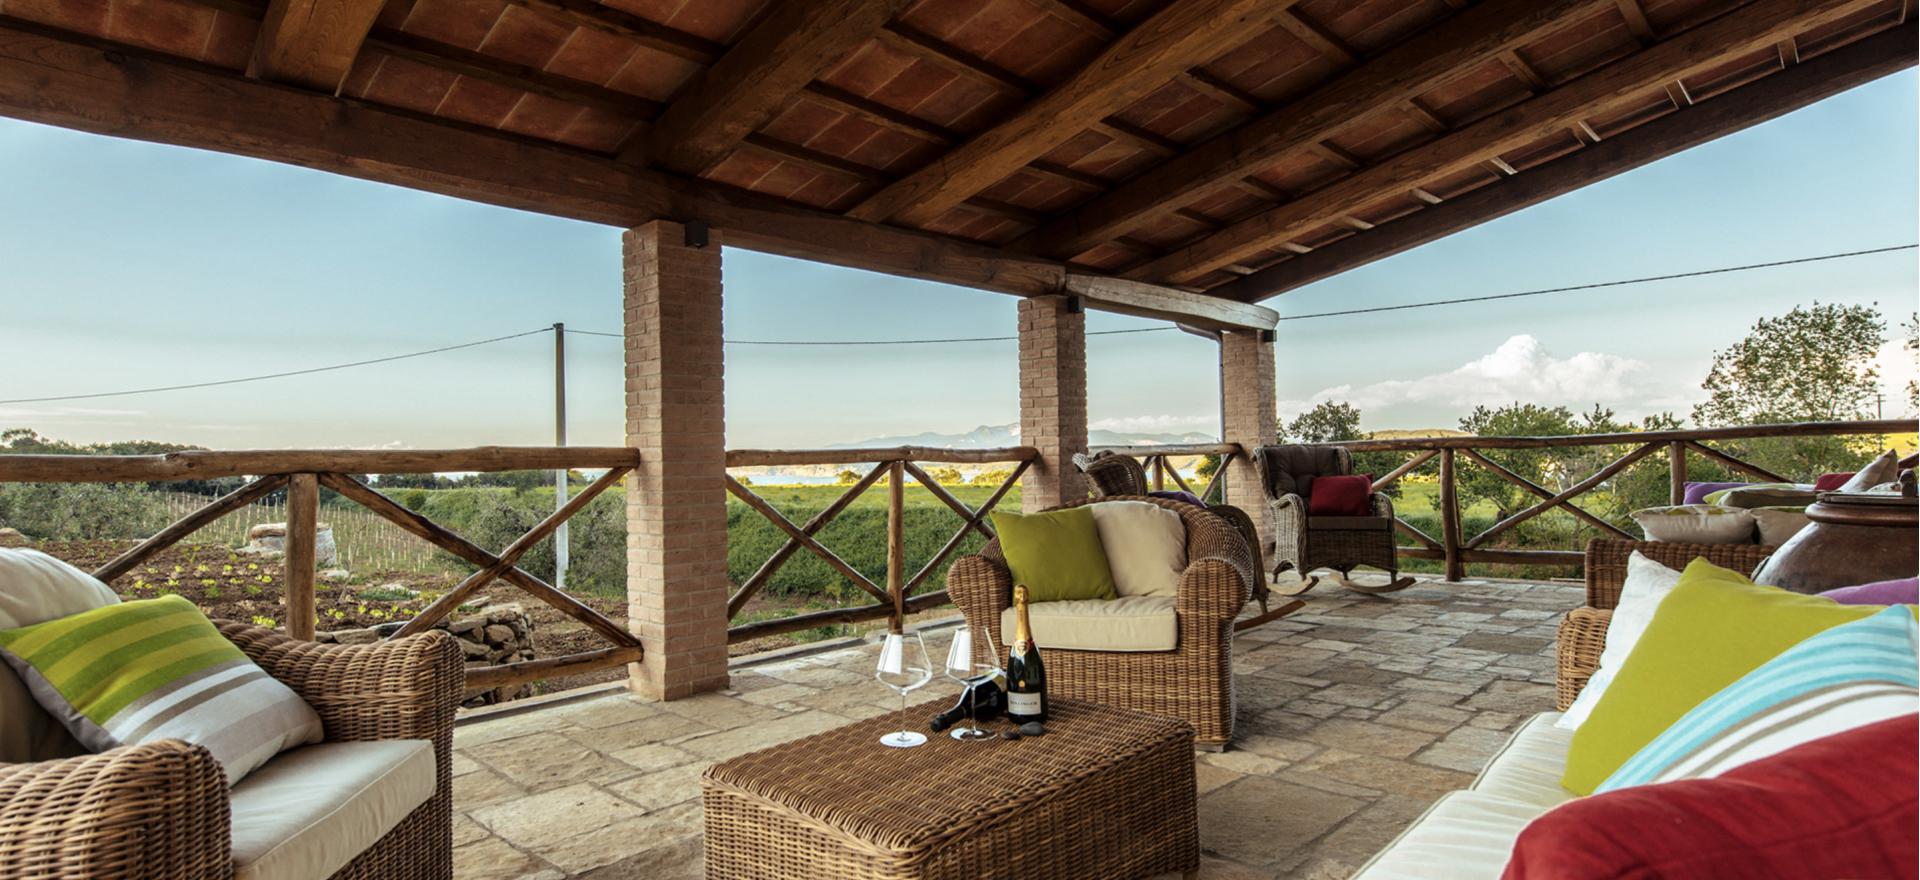 Agriturismo Tuscany Luxury agriturismo in Tuscany with sea view